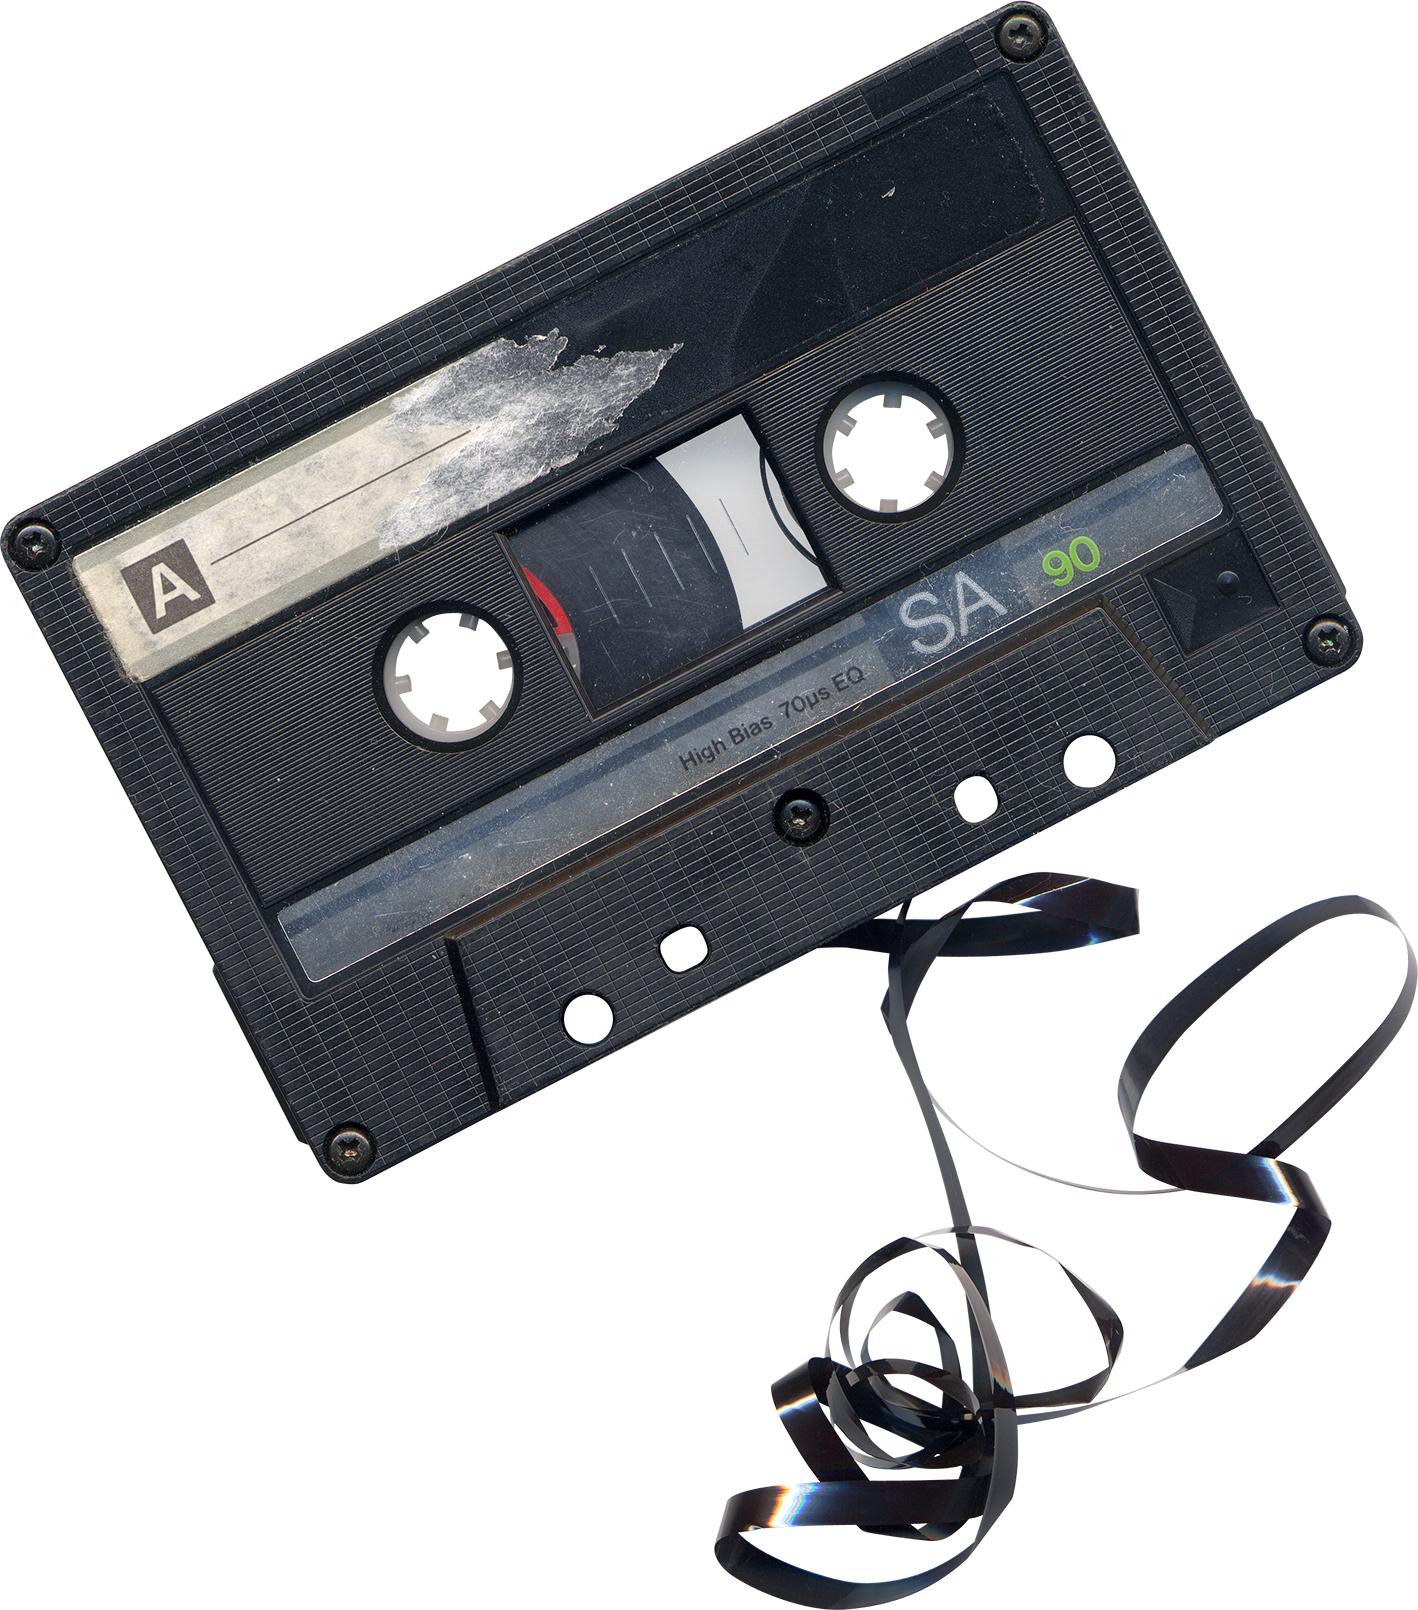 Chewed Cassette Tape png